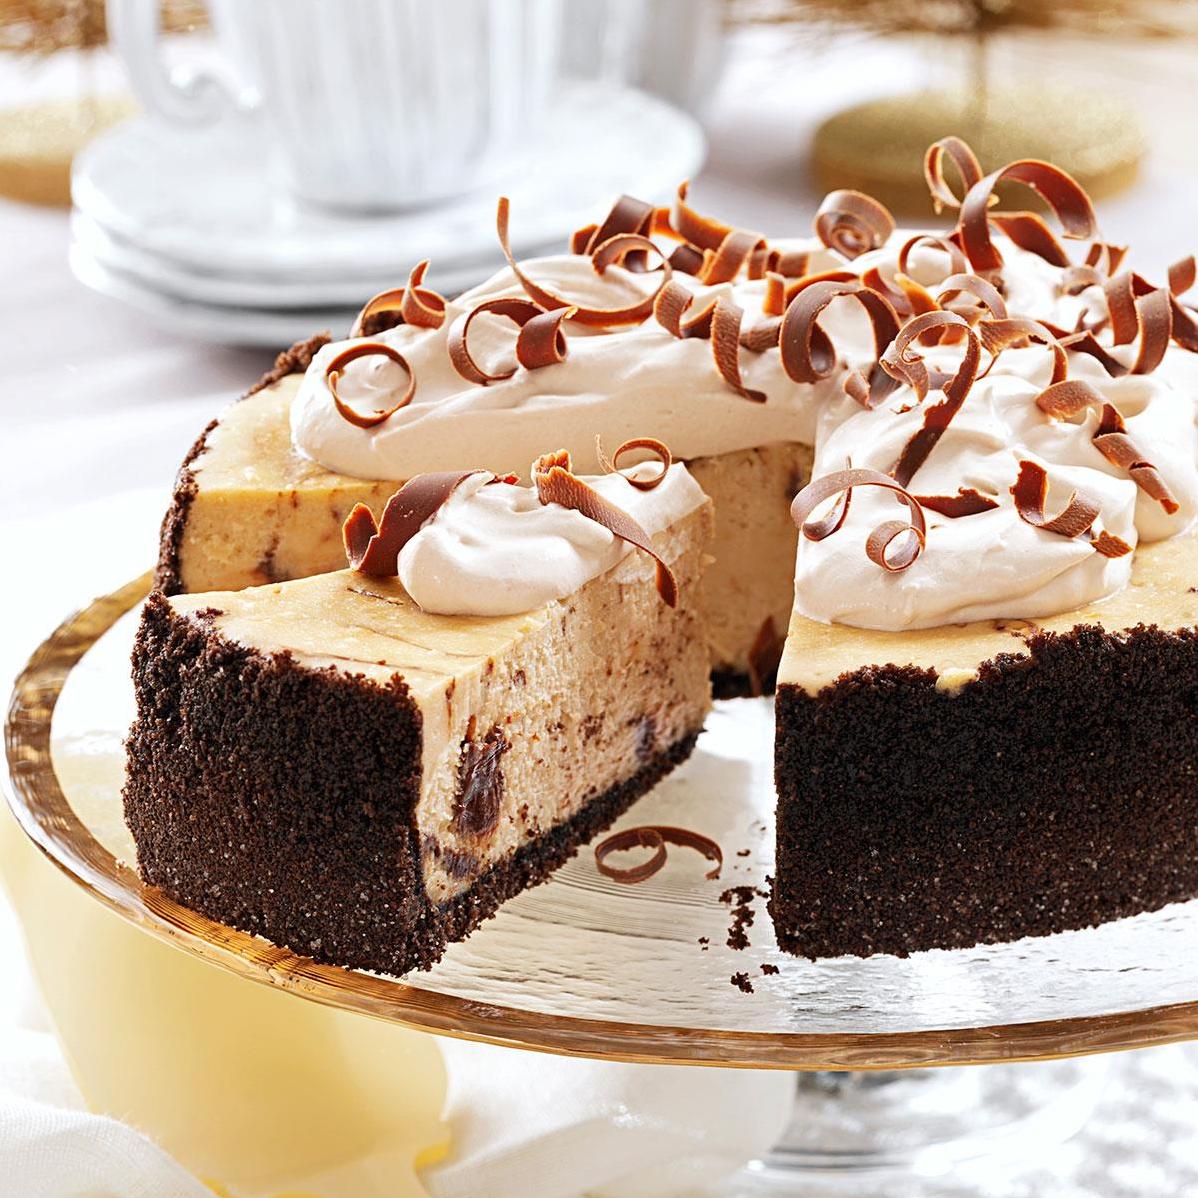  A decadent slice of heaven!